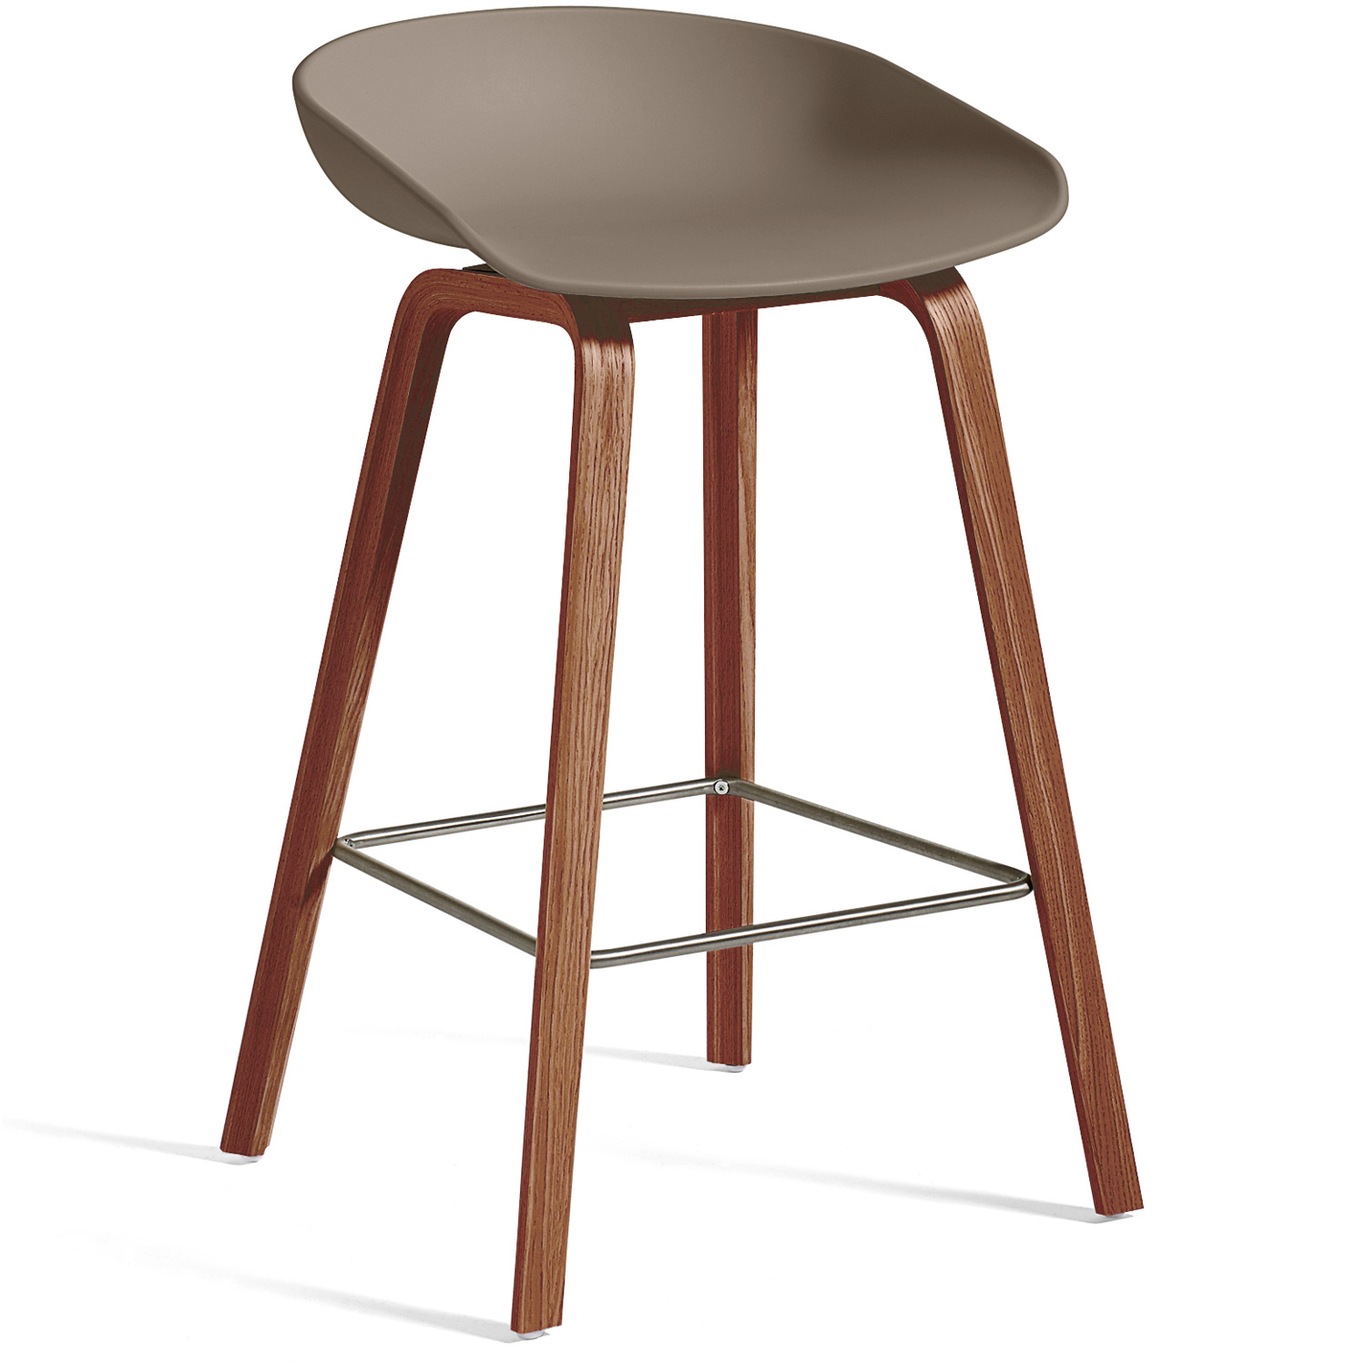 AAS 32 Bar Stool Low, Water based lacquered Walnut / Khaki